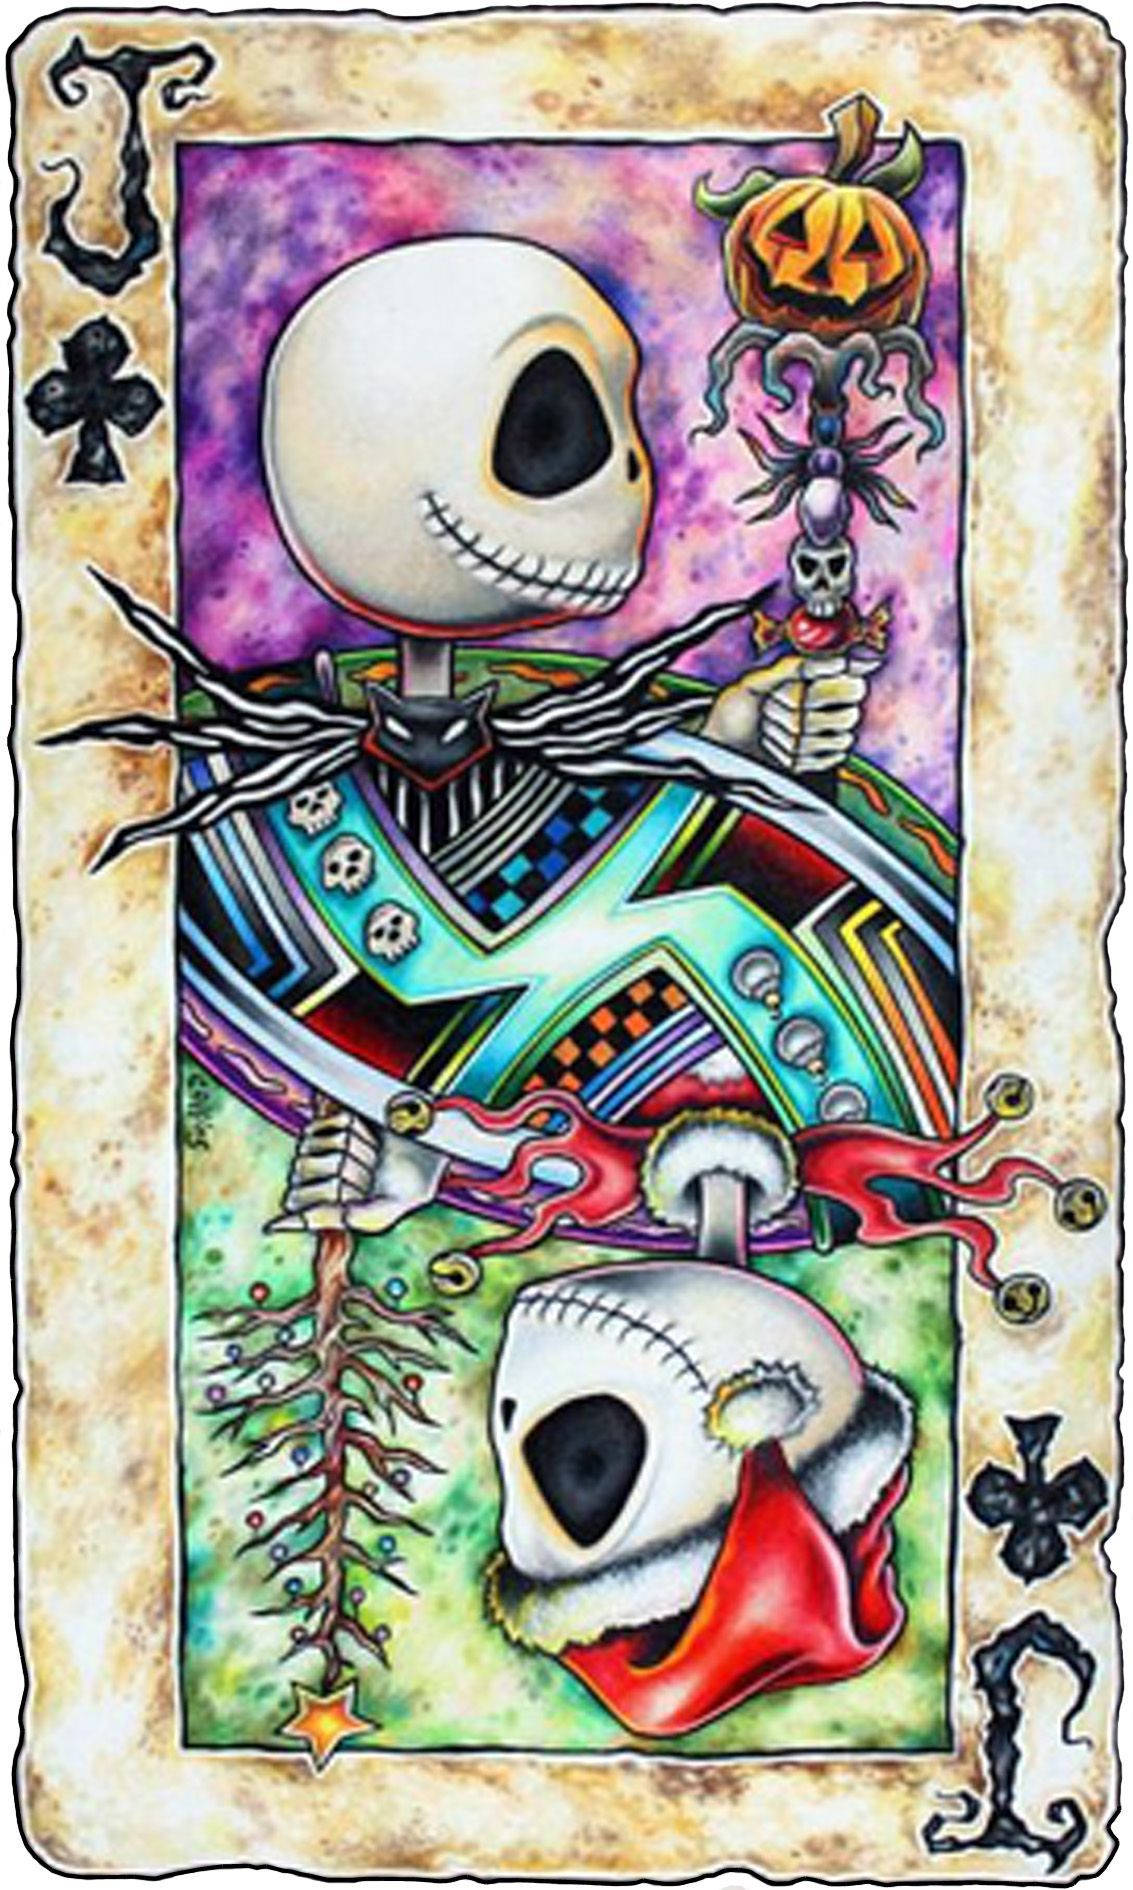 Jack Card The Nightmare Before Christmas Wallpaper